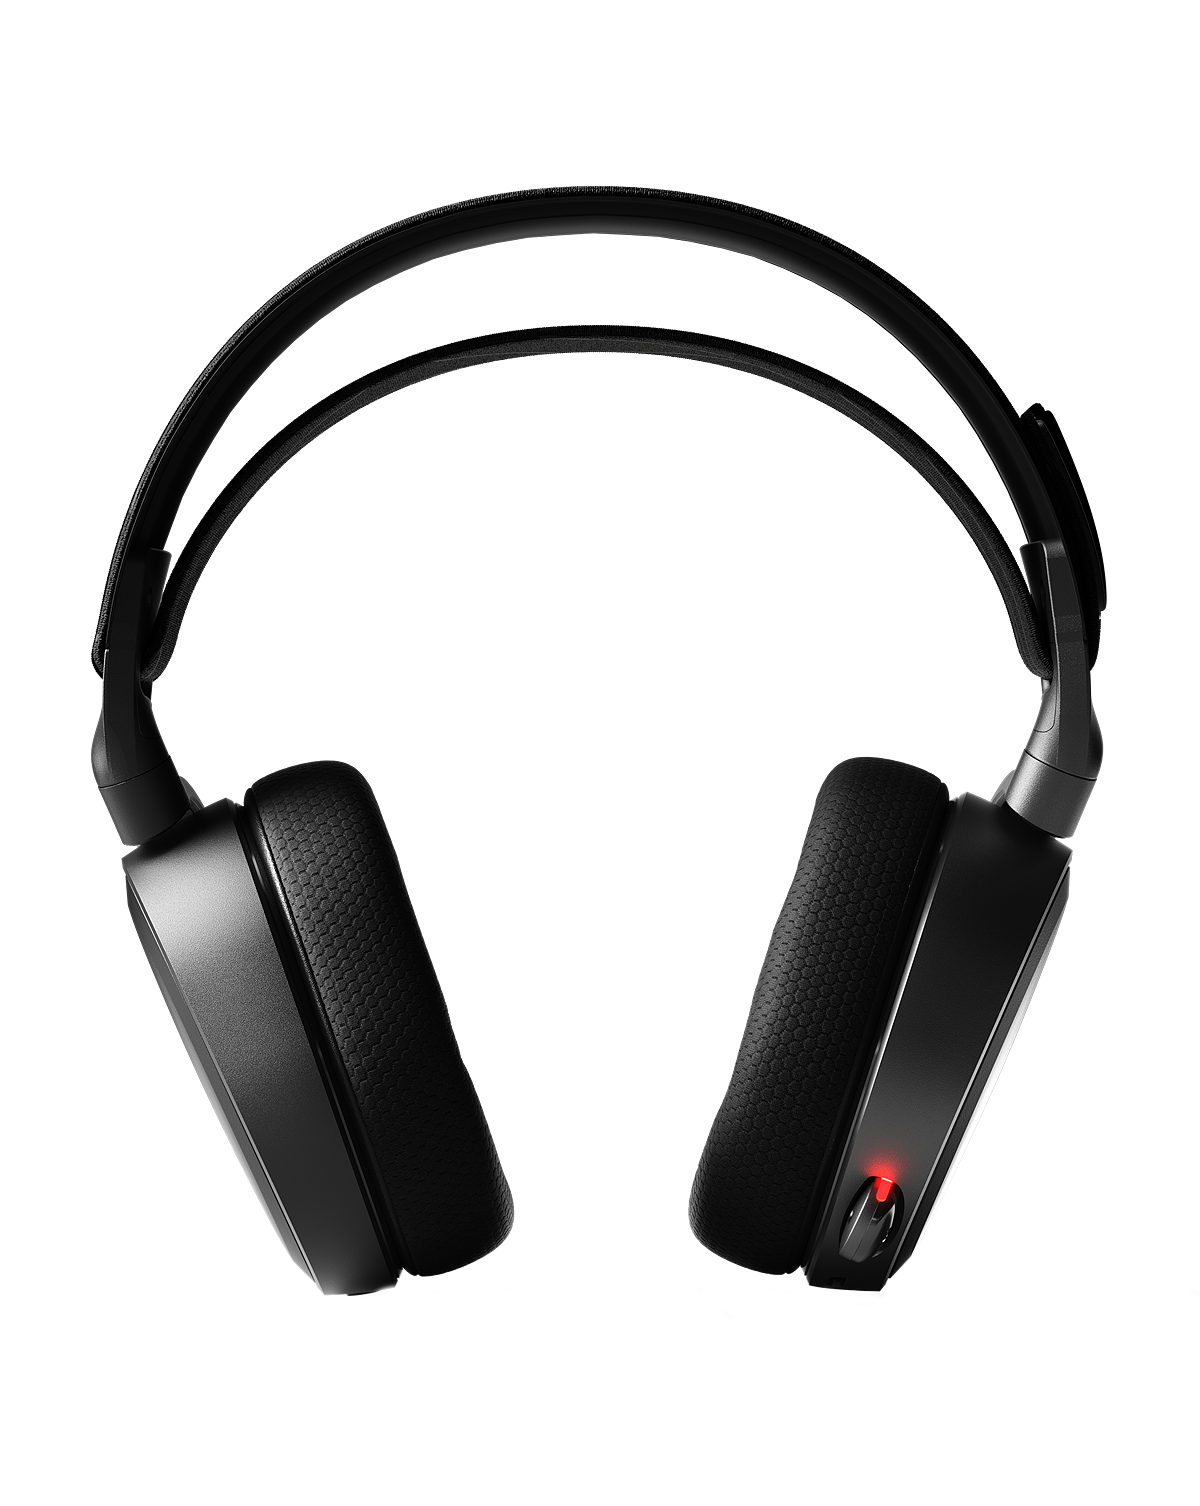 Headset viewed from a front angle